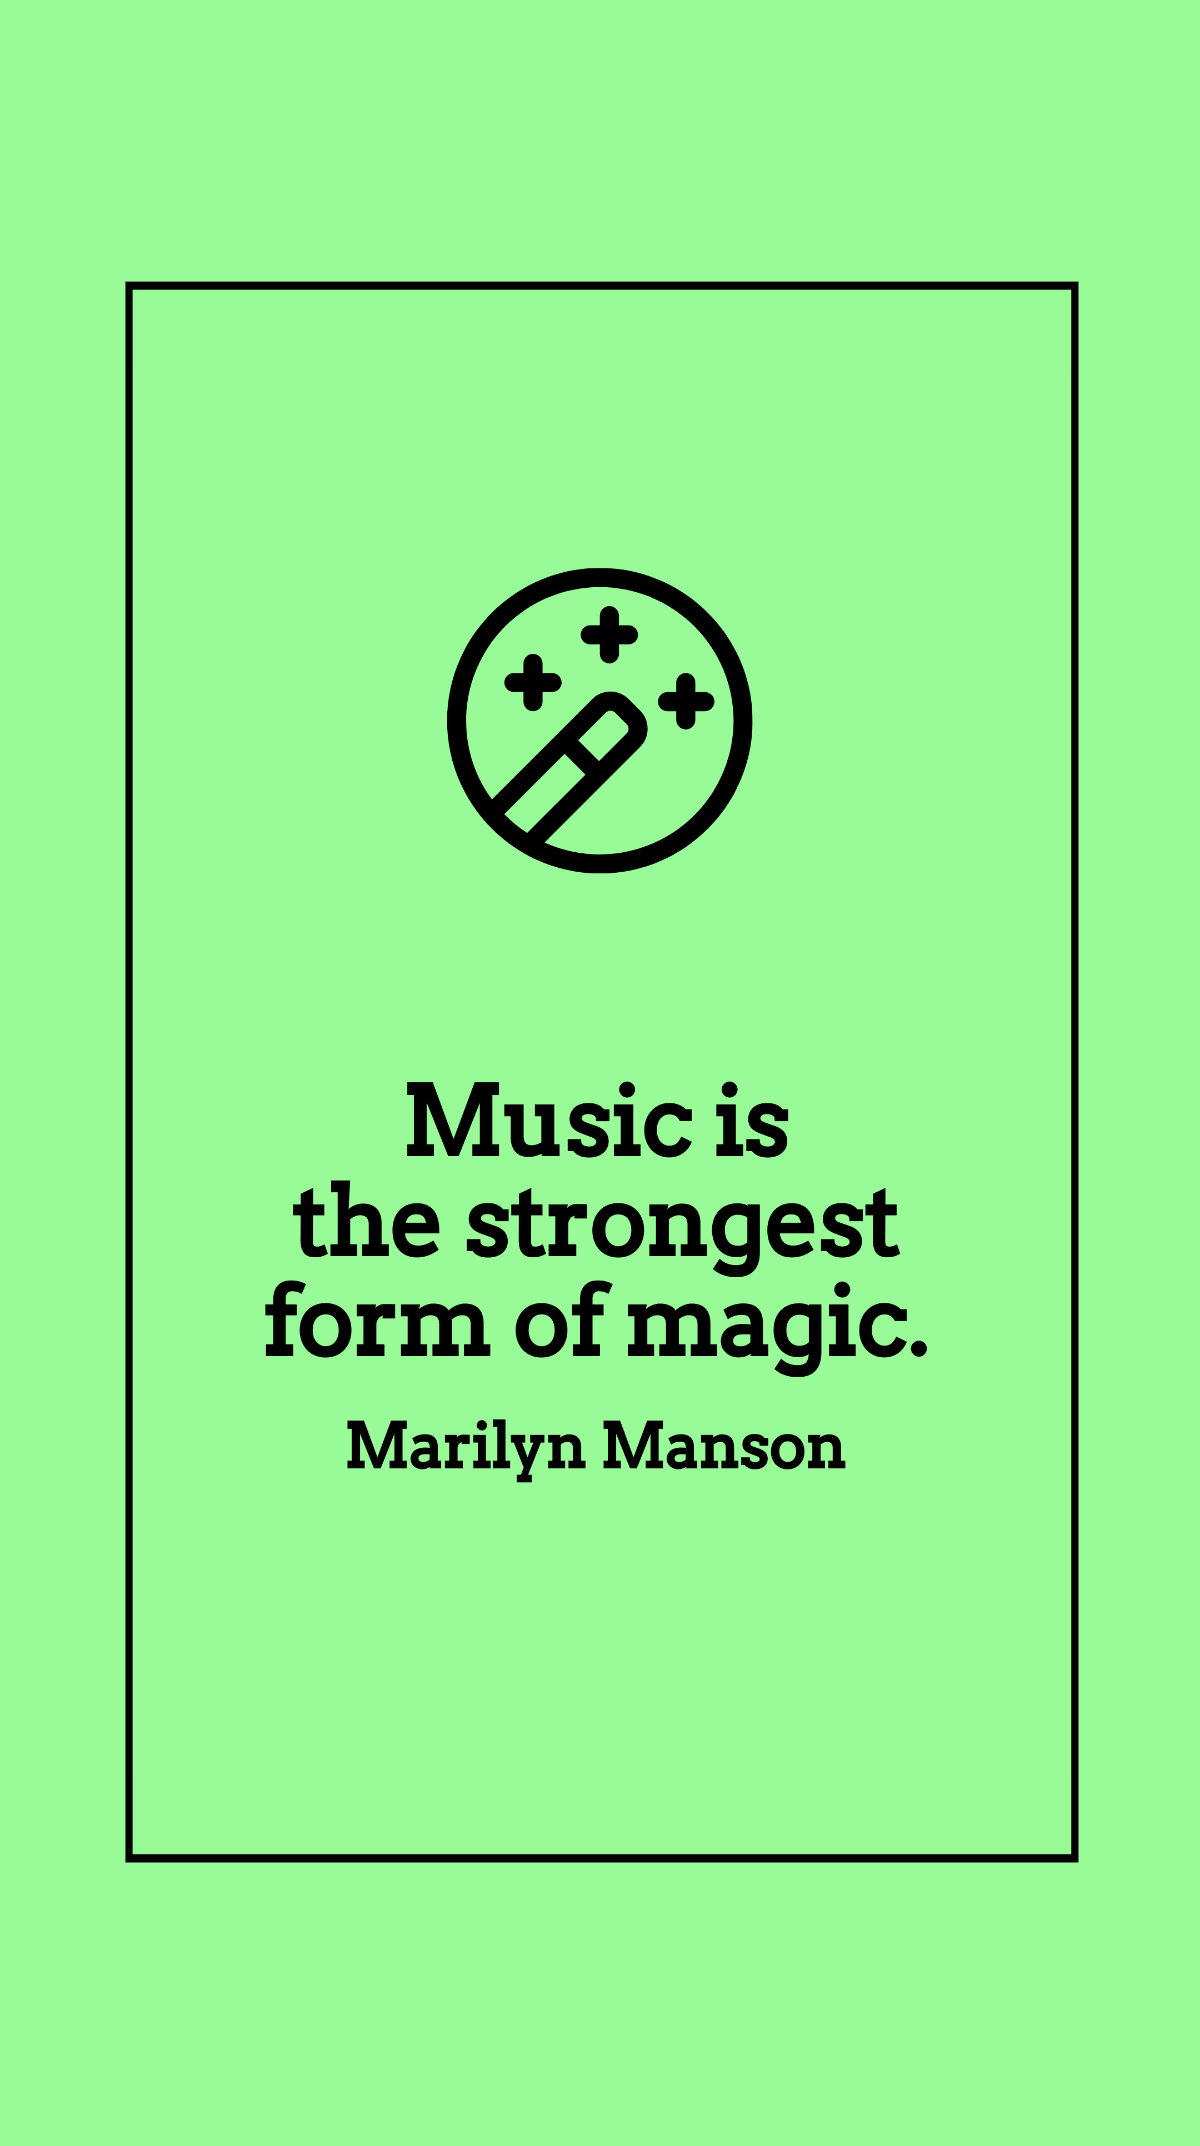 Marilyn Manson - Music is the strongest form of magic.